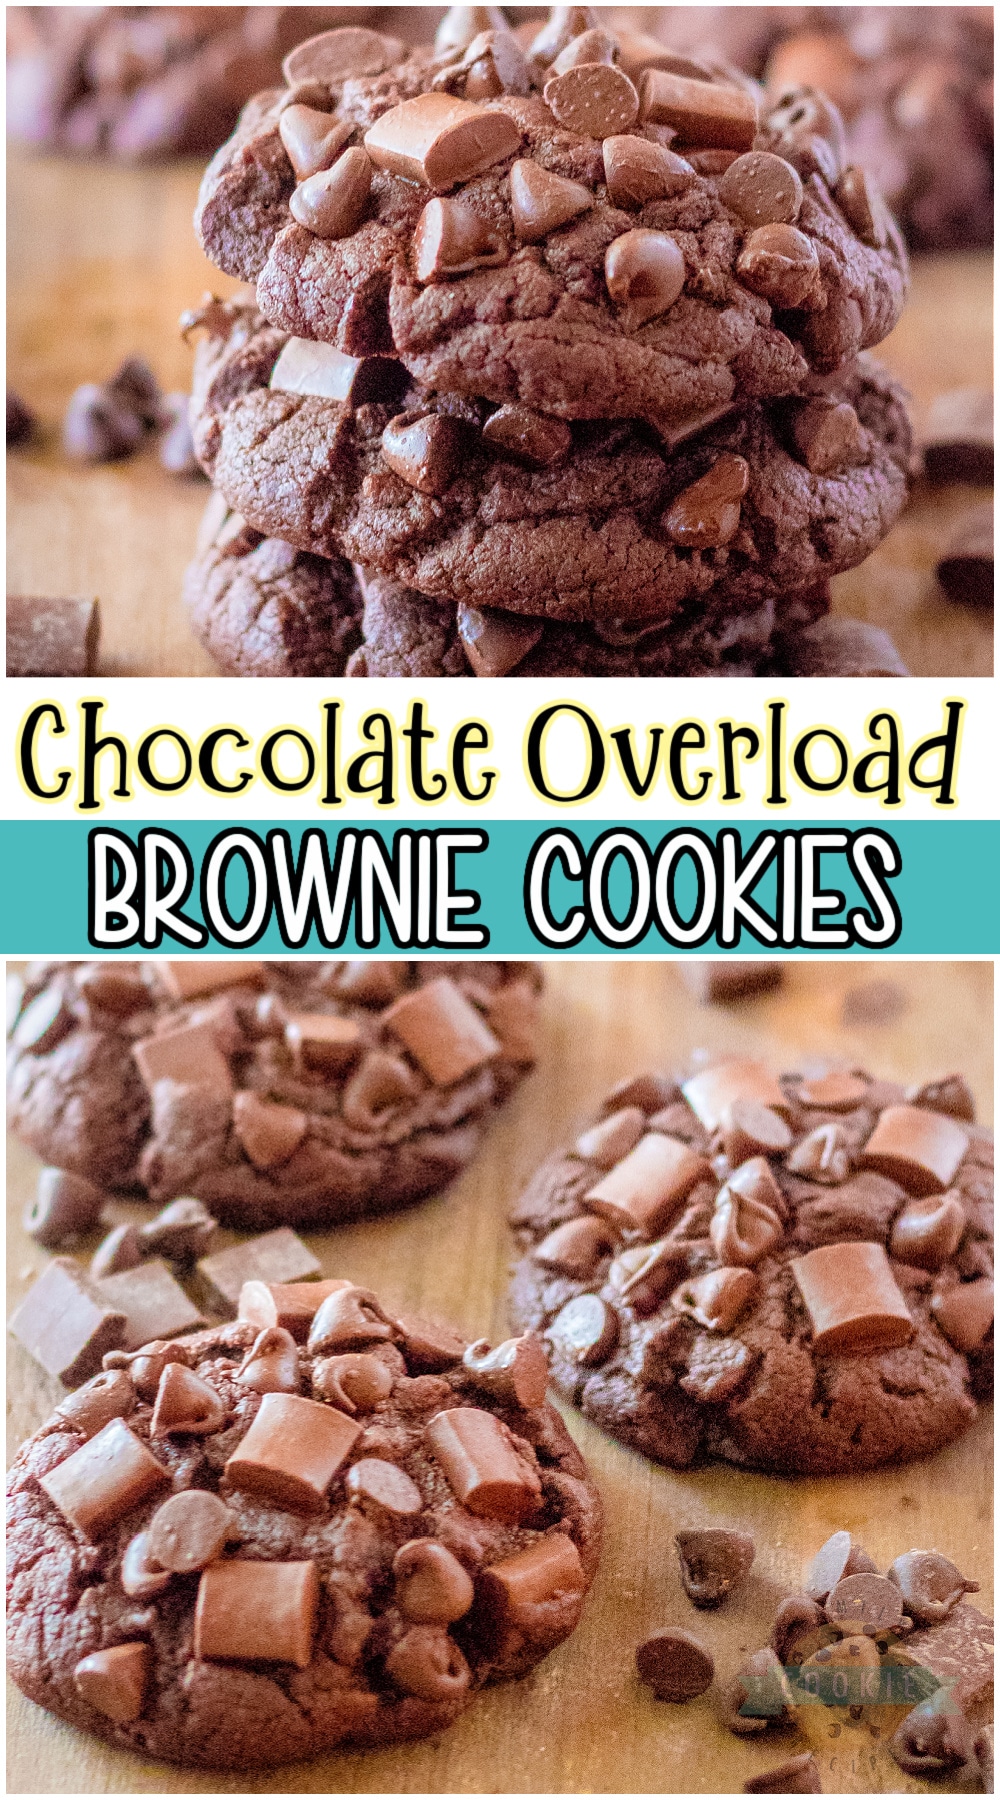 Chocolate Brownie Cookies are soft & fudgy brownies in cookie form! Recipe is loaded with chocolate and made into over-the-top GIANT cookies that everyone goes crazy for! #brownies #cookies #chocolate #baking #easyrecipe from FAMILY COOKIE RECIPES via @buttergirls